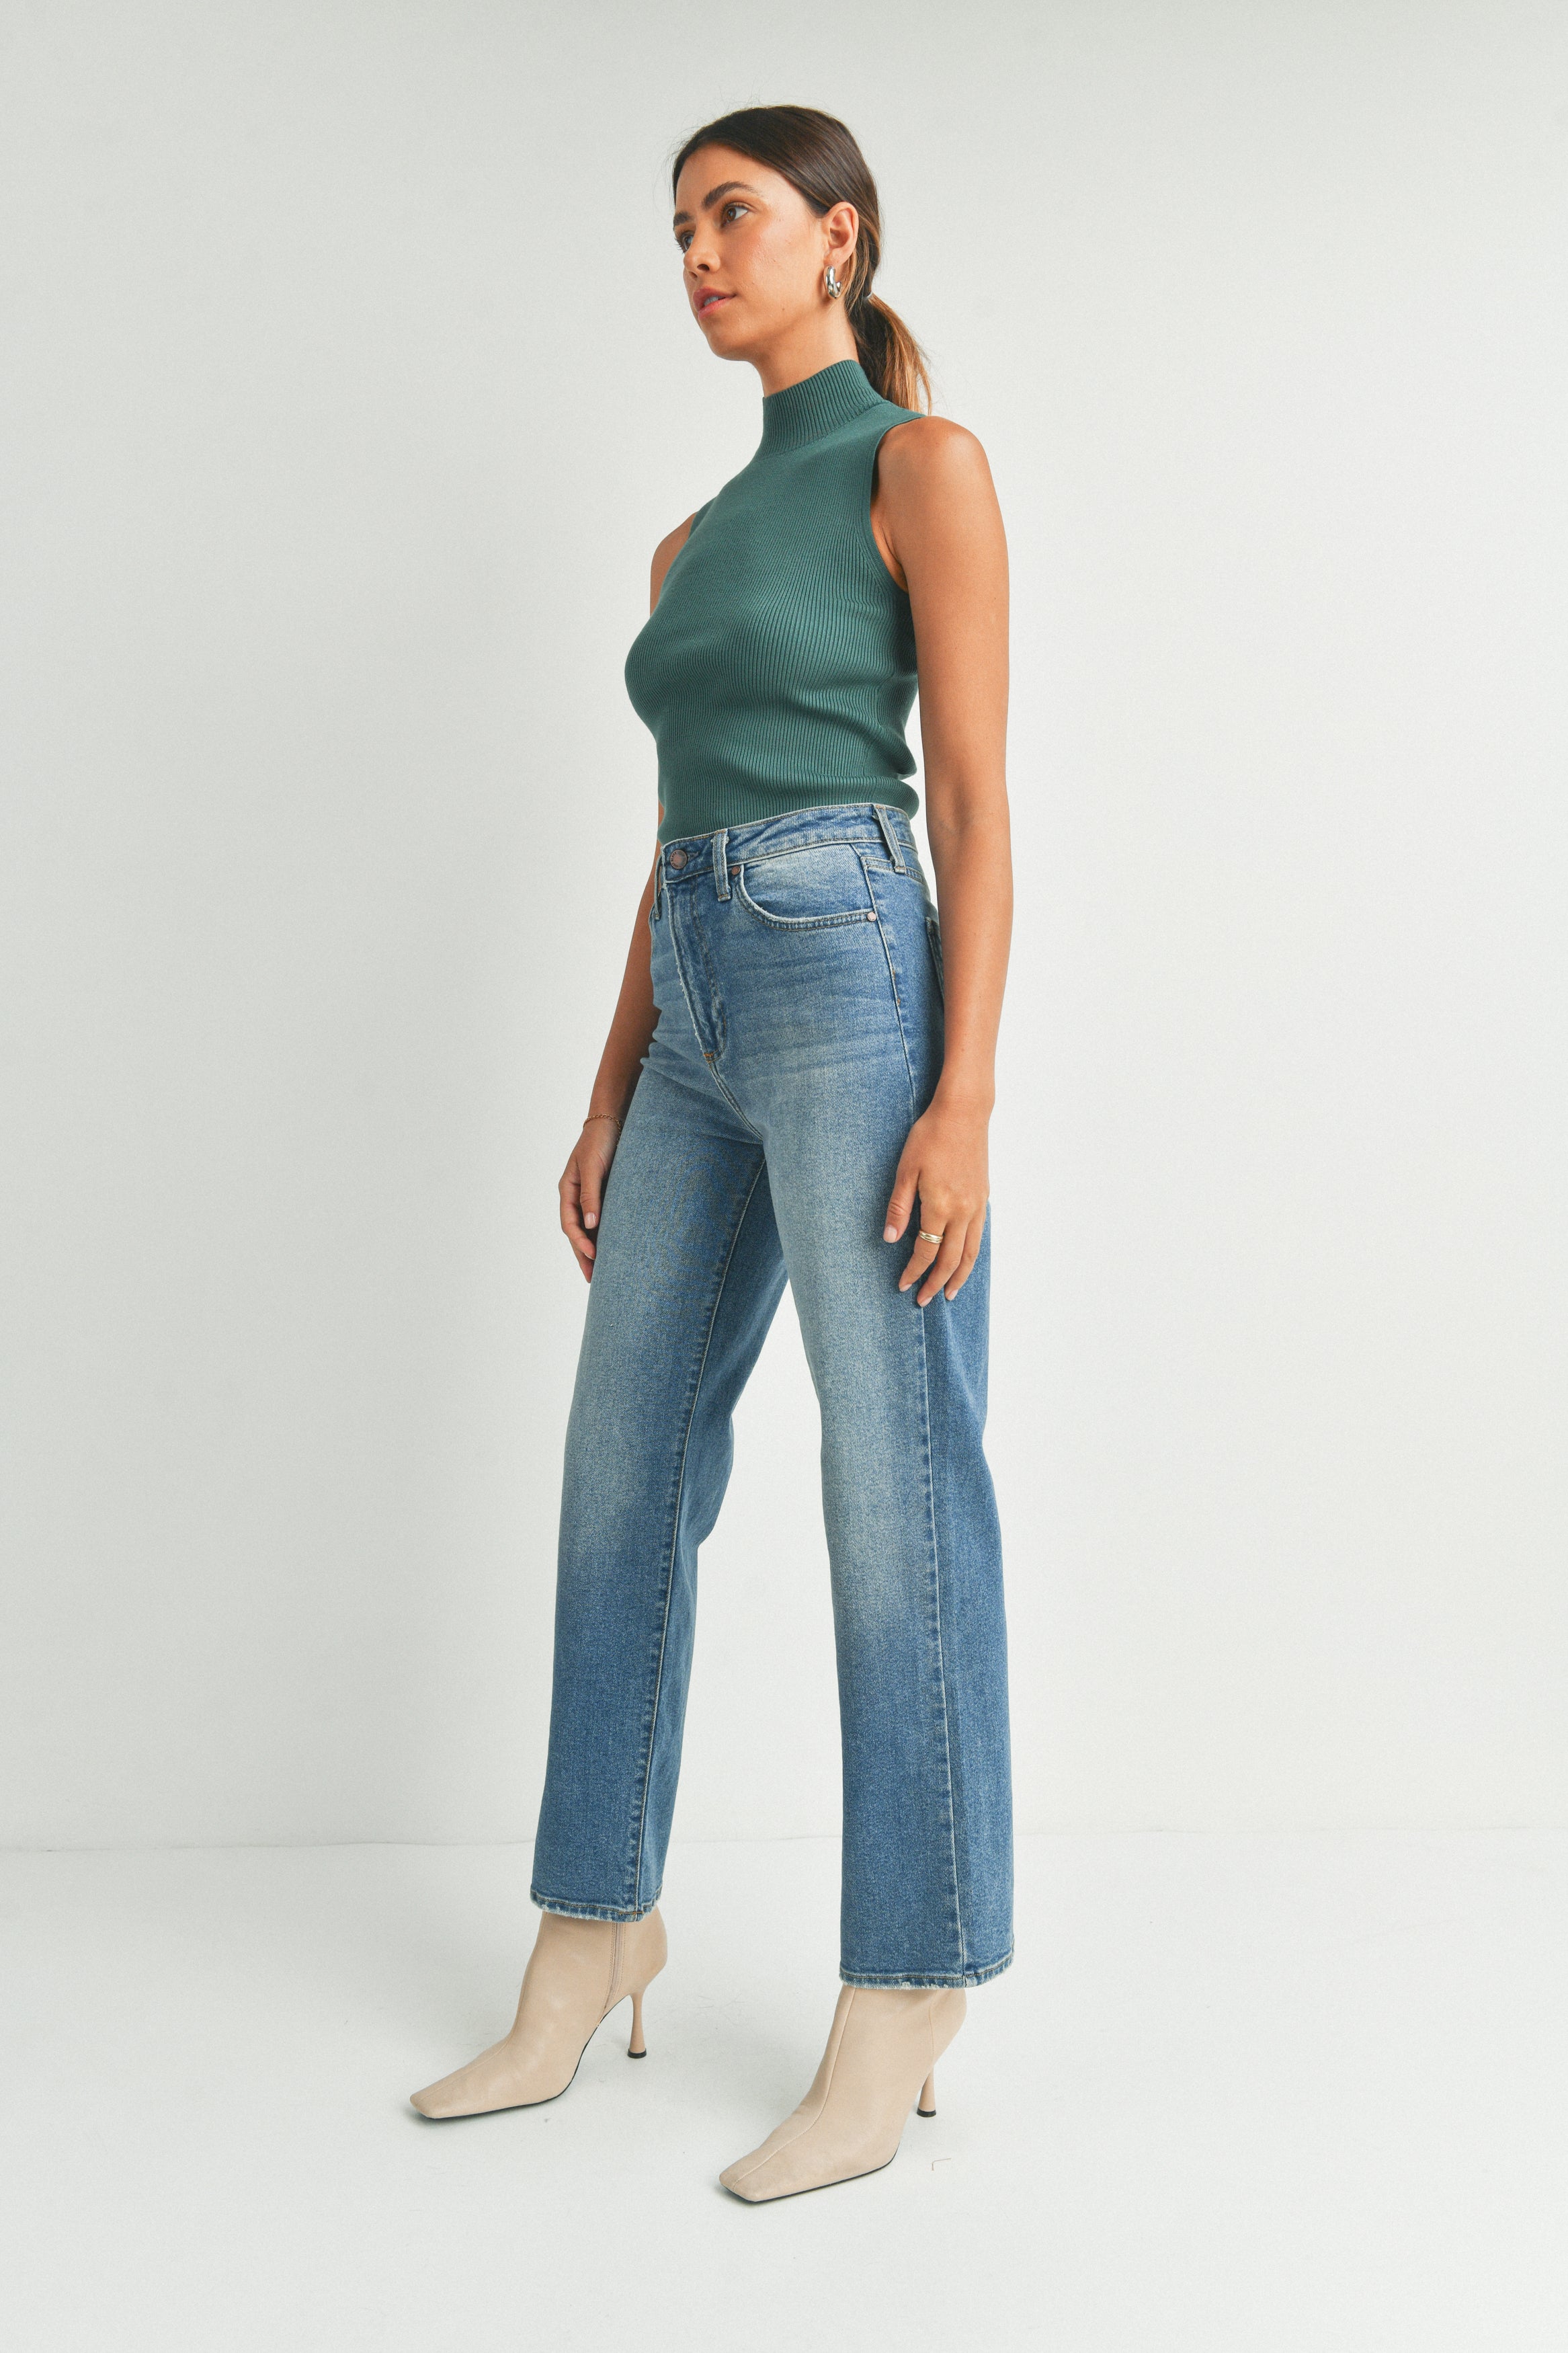 Women's Ultra High-Rise Ripped Light Wash Dad Jeans